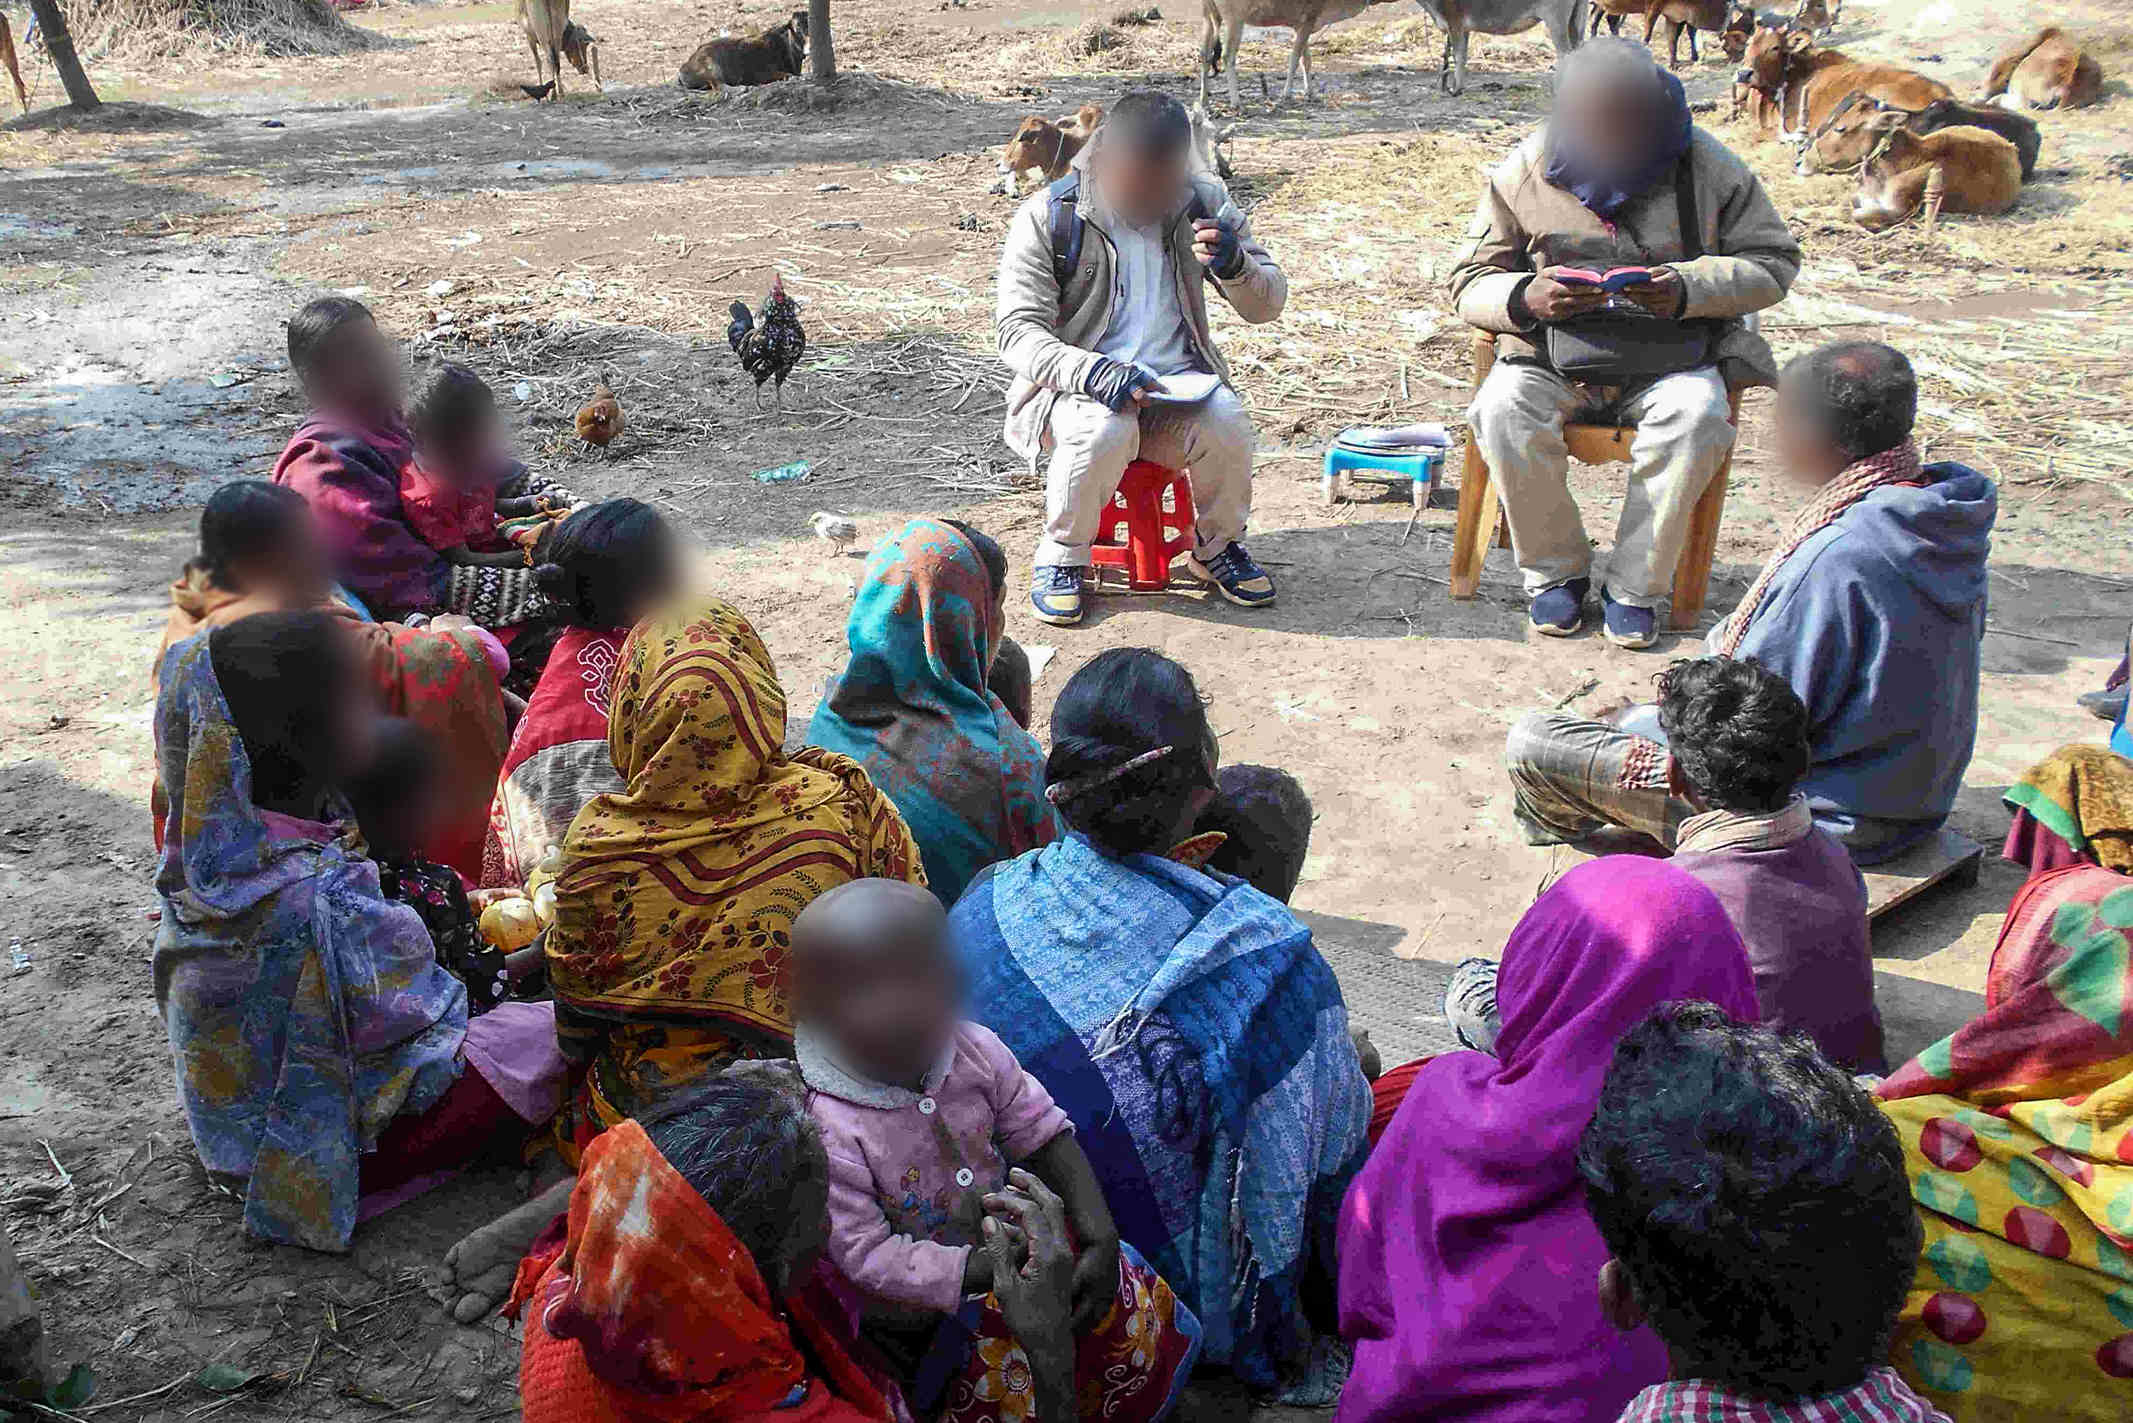 Christian missionaries sitting outside on plastic stools and chairs read the Bible to a group of Bangledeshi woman and children